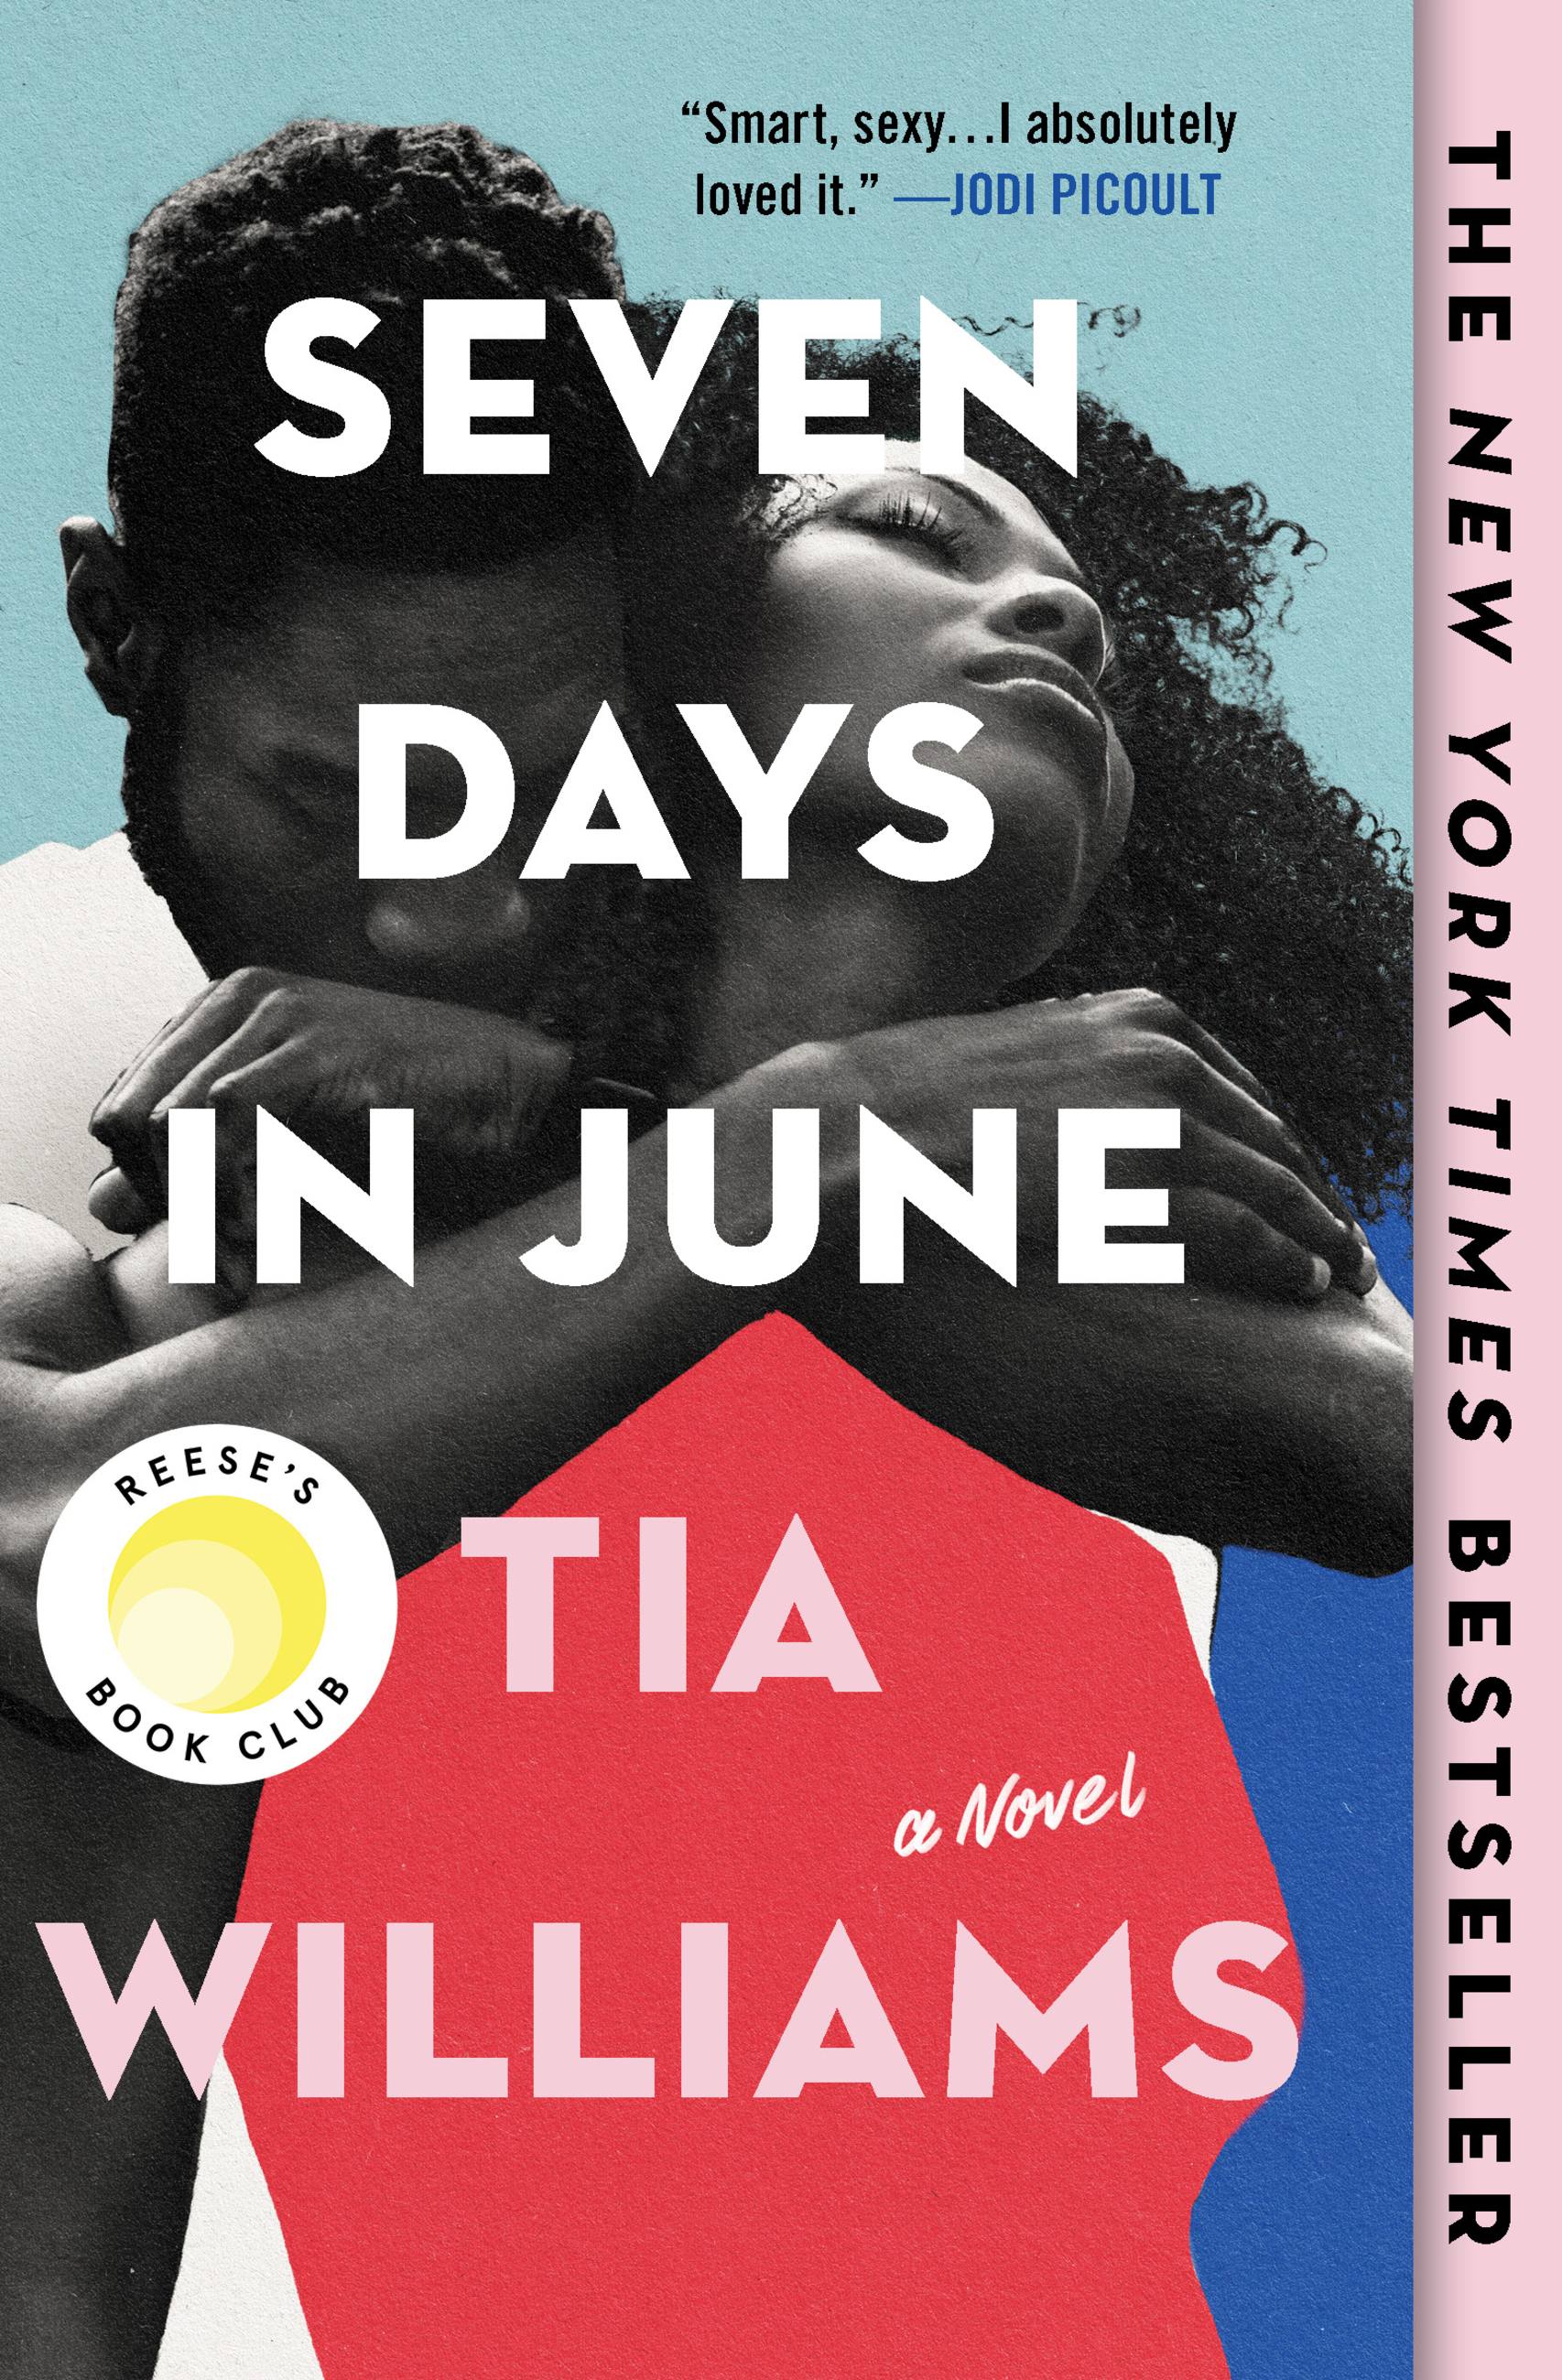 Mom And Son Force Cheting Her Husband - Seven Days in June by Tia Williams | Hachette Book Group